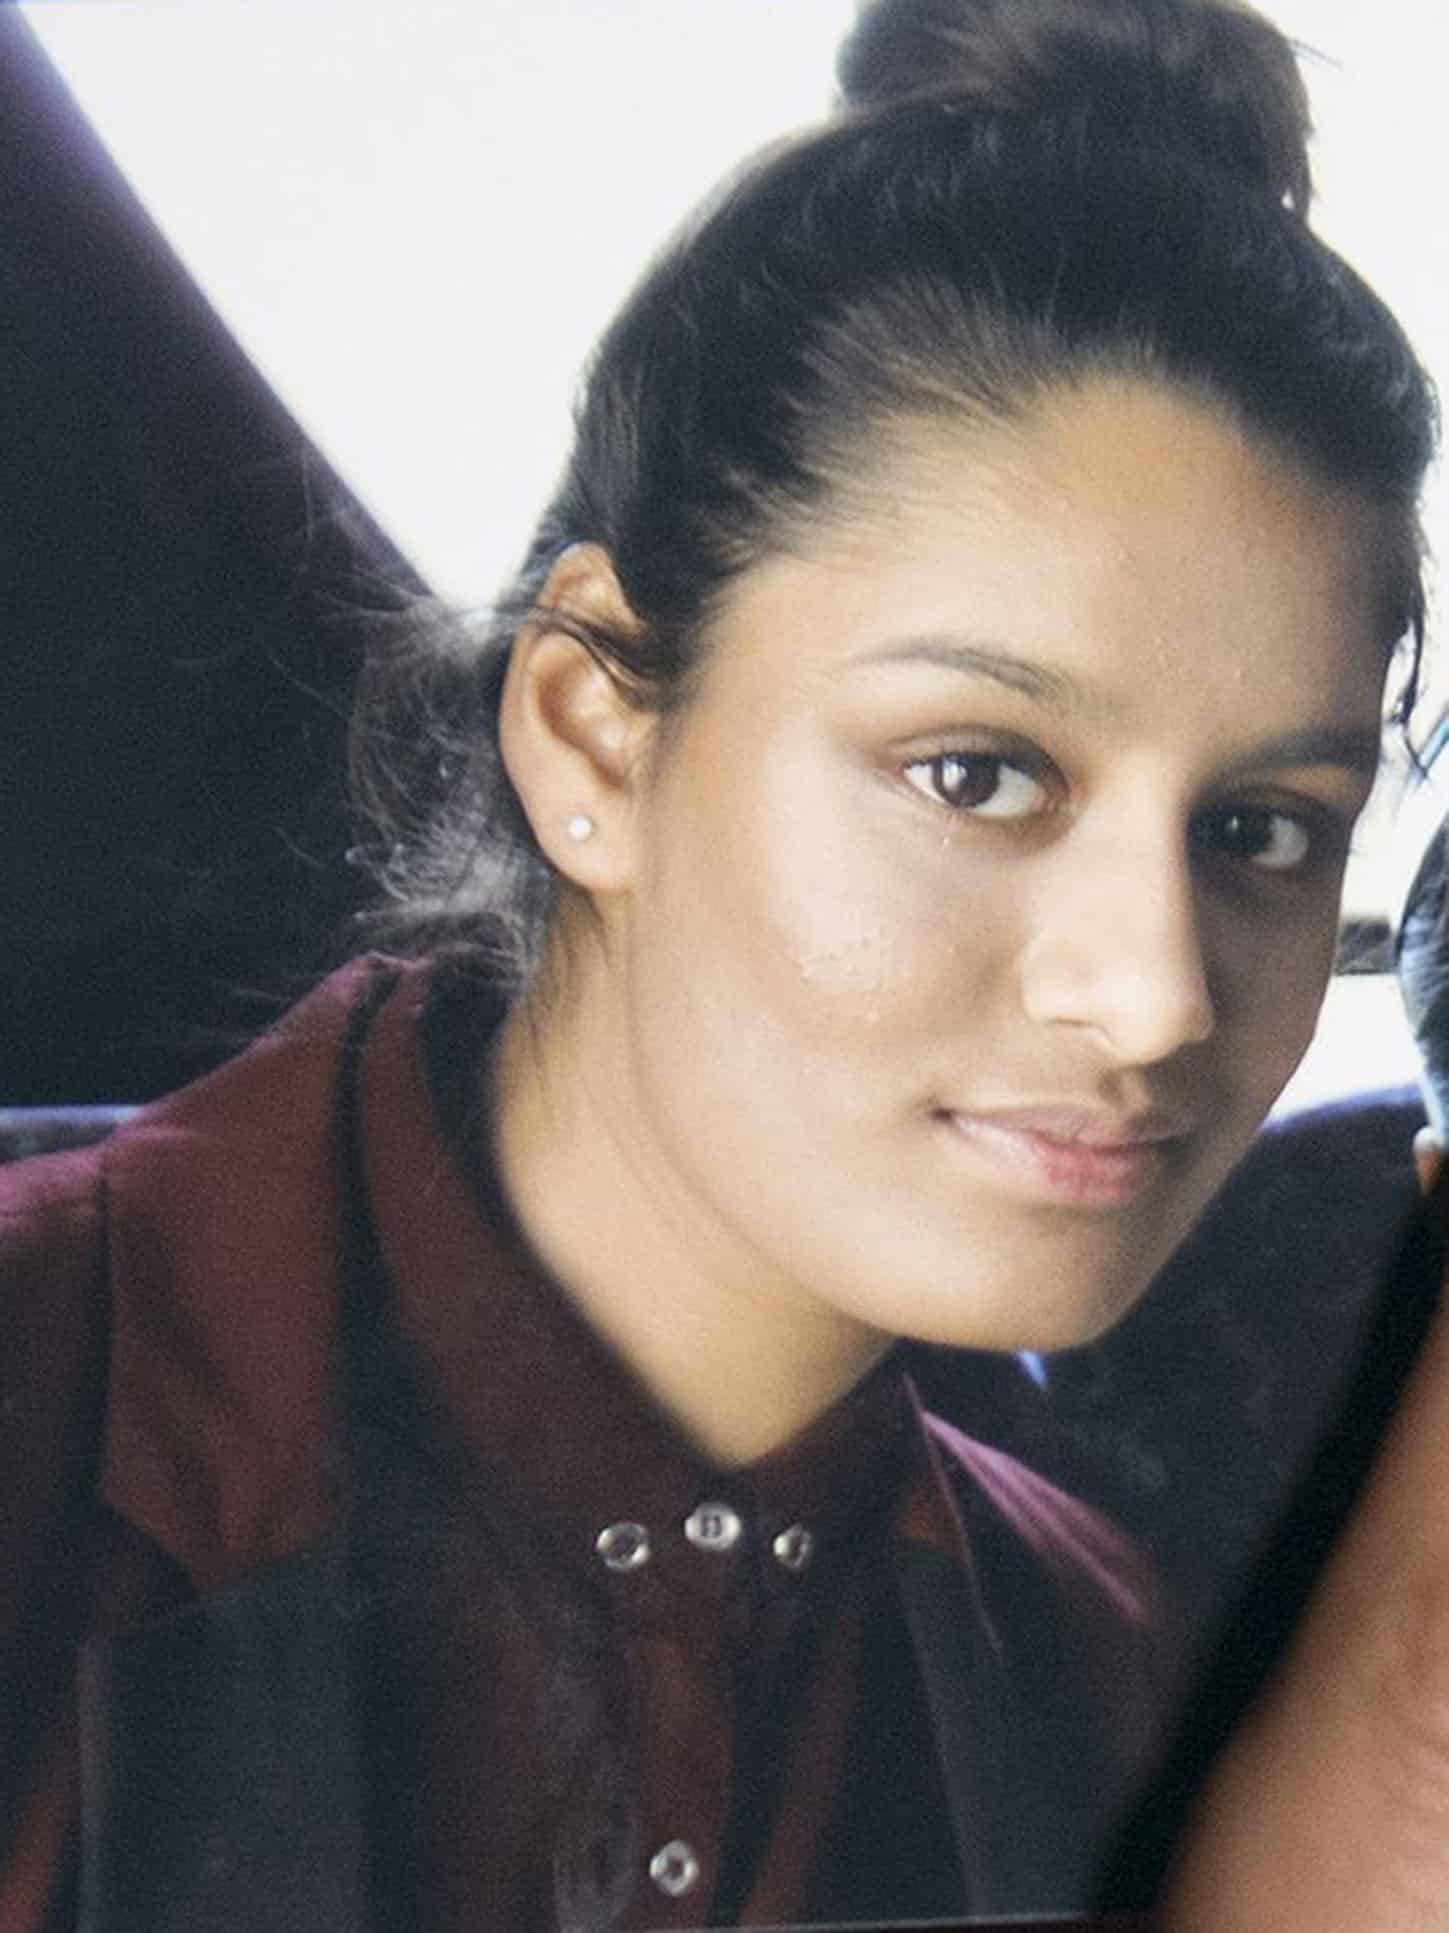 Shamima Begum wins right to return to Britain and challenge citizenship ruling